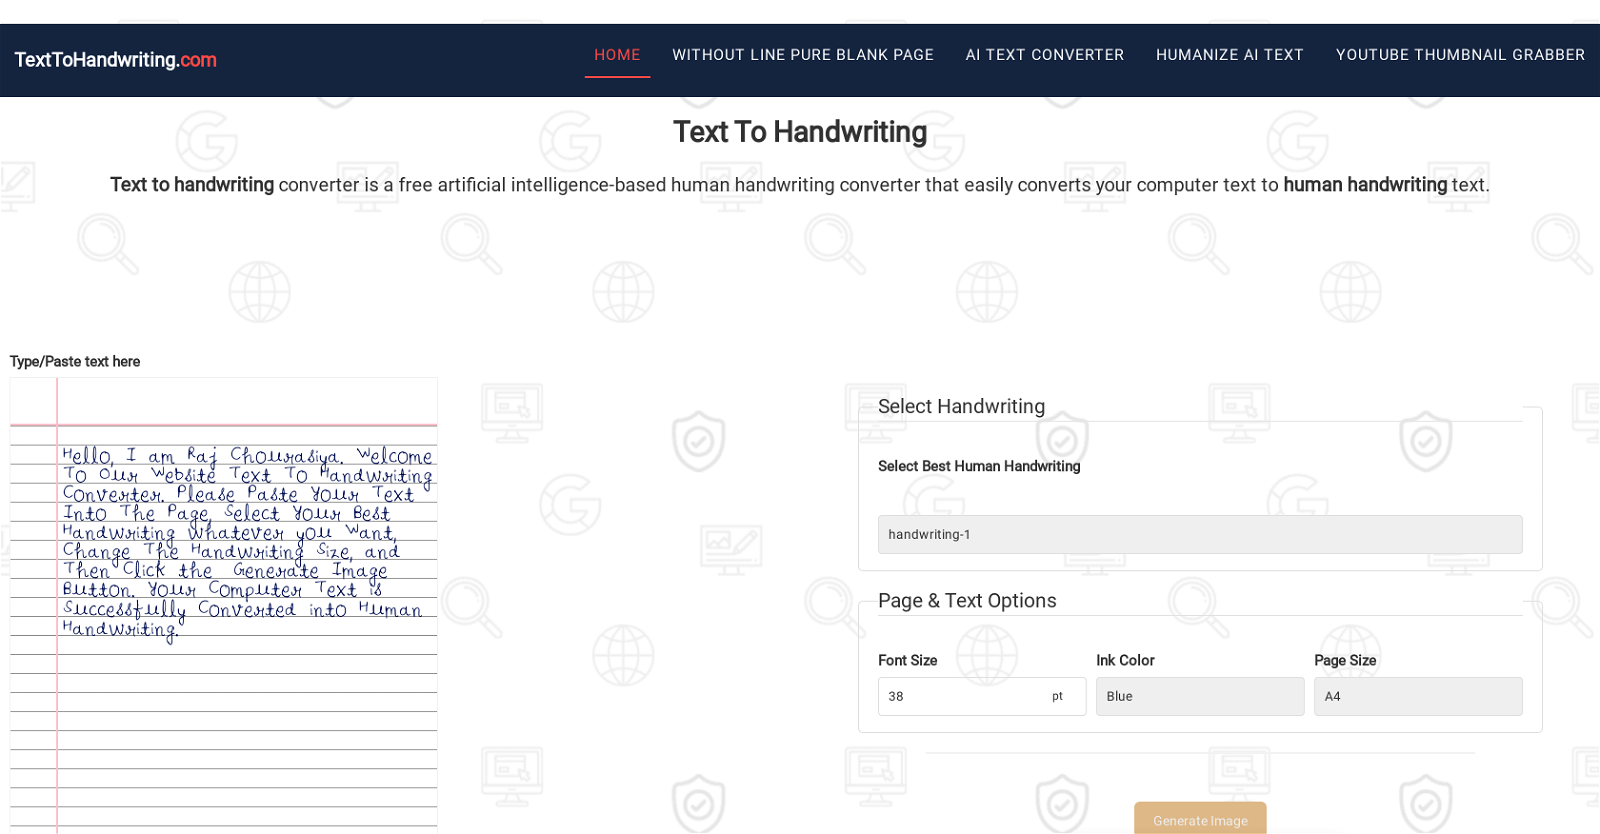 Text To Handwriting website